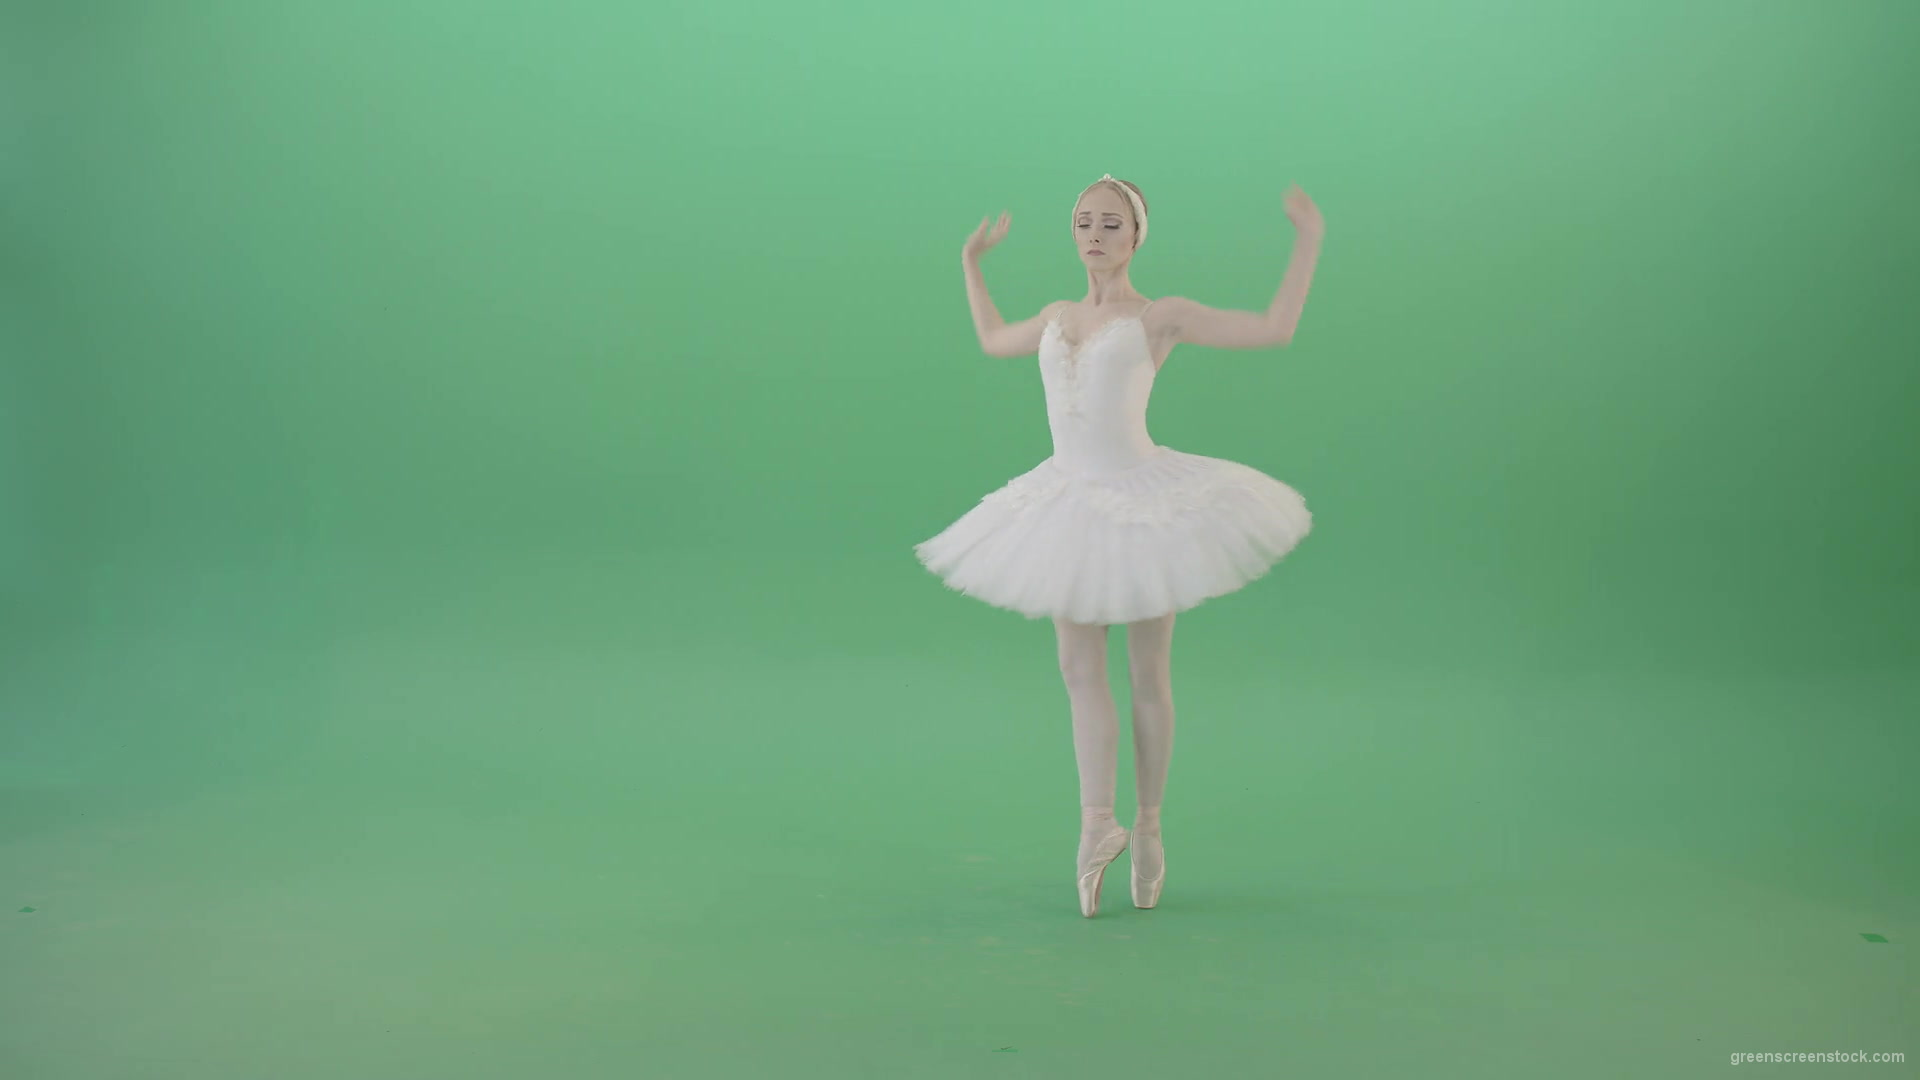 Luxury-ballet-girl-ballerina-flying-in-the-sky-and-waving-hands-on-green-screen-4K-Video-Footage-1920_002 Green Screen Stock